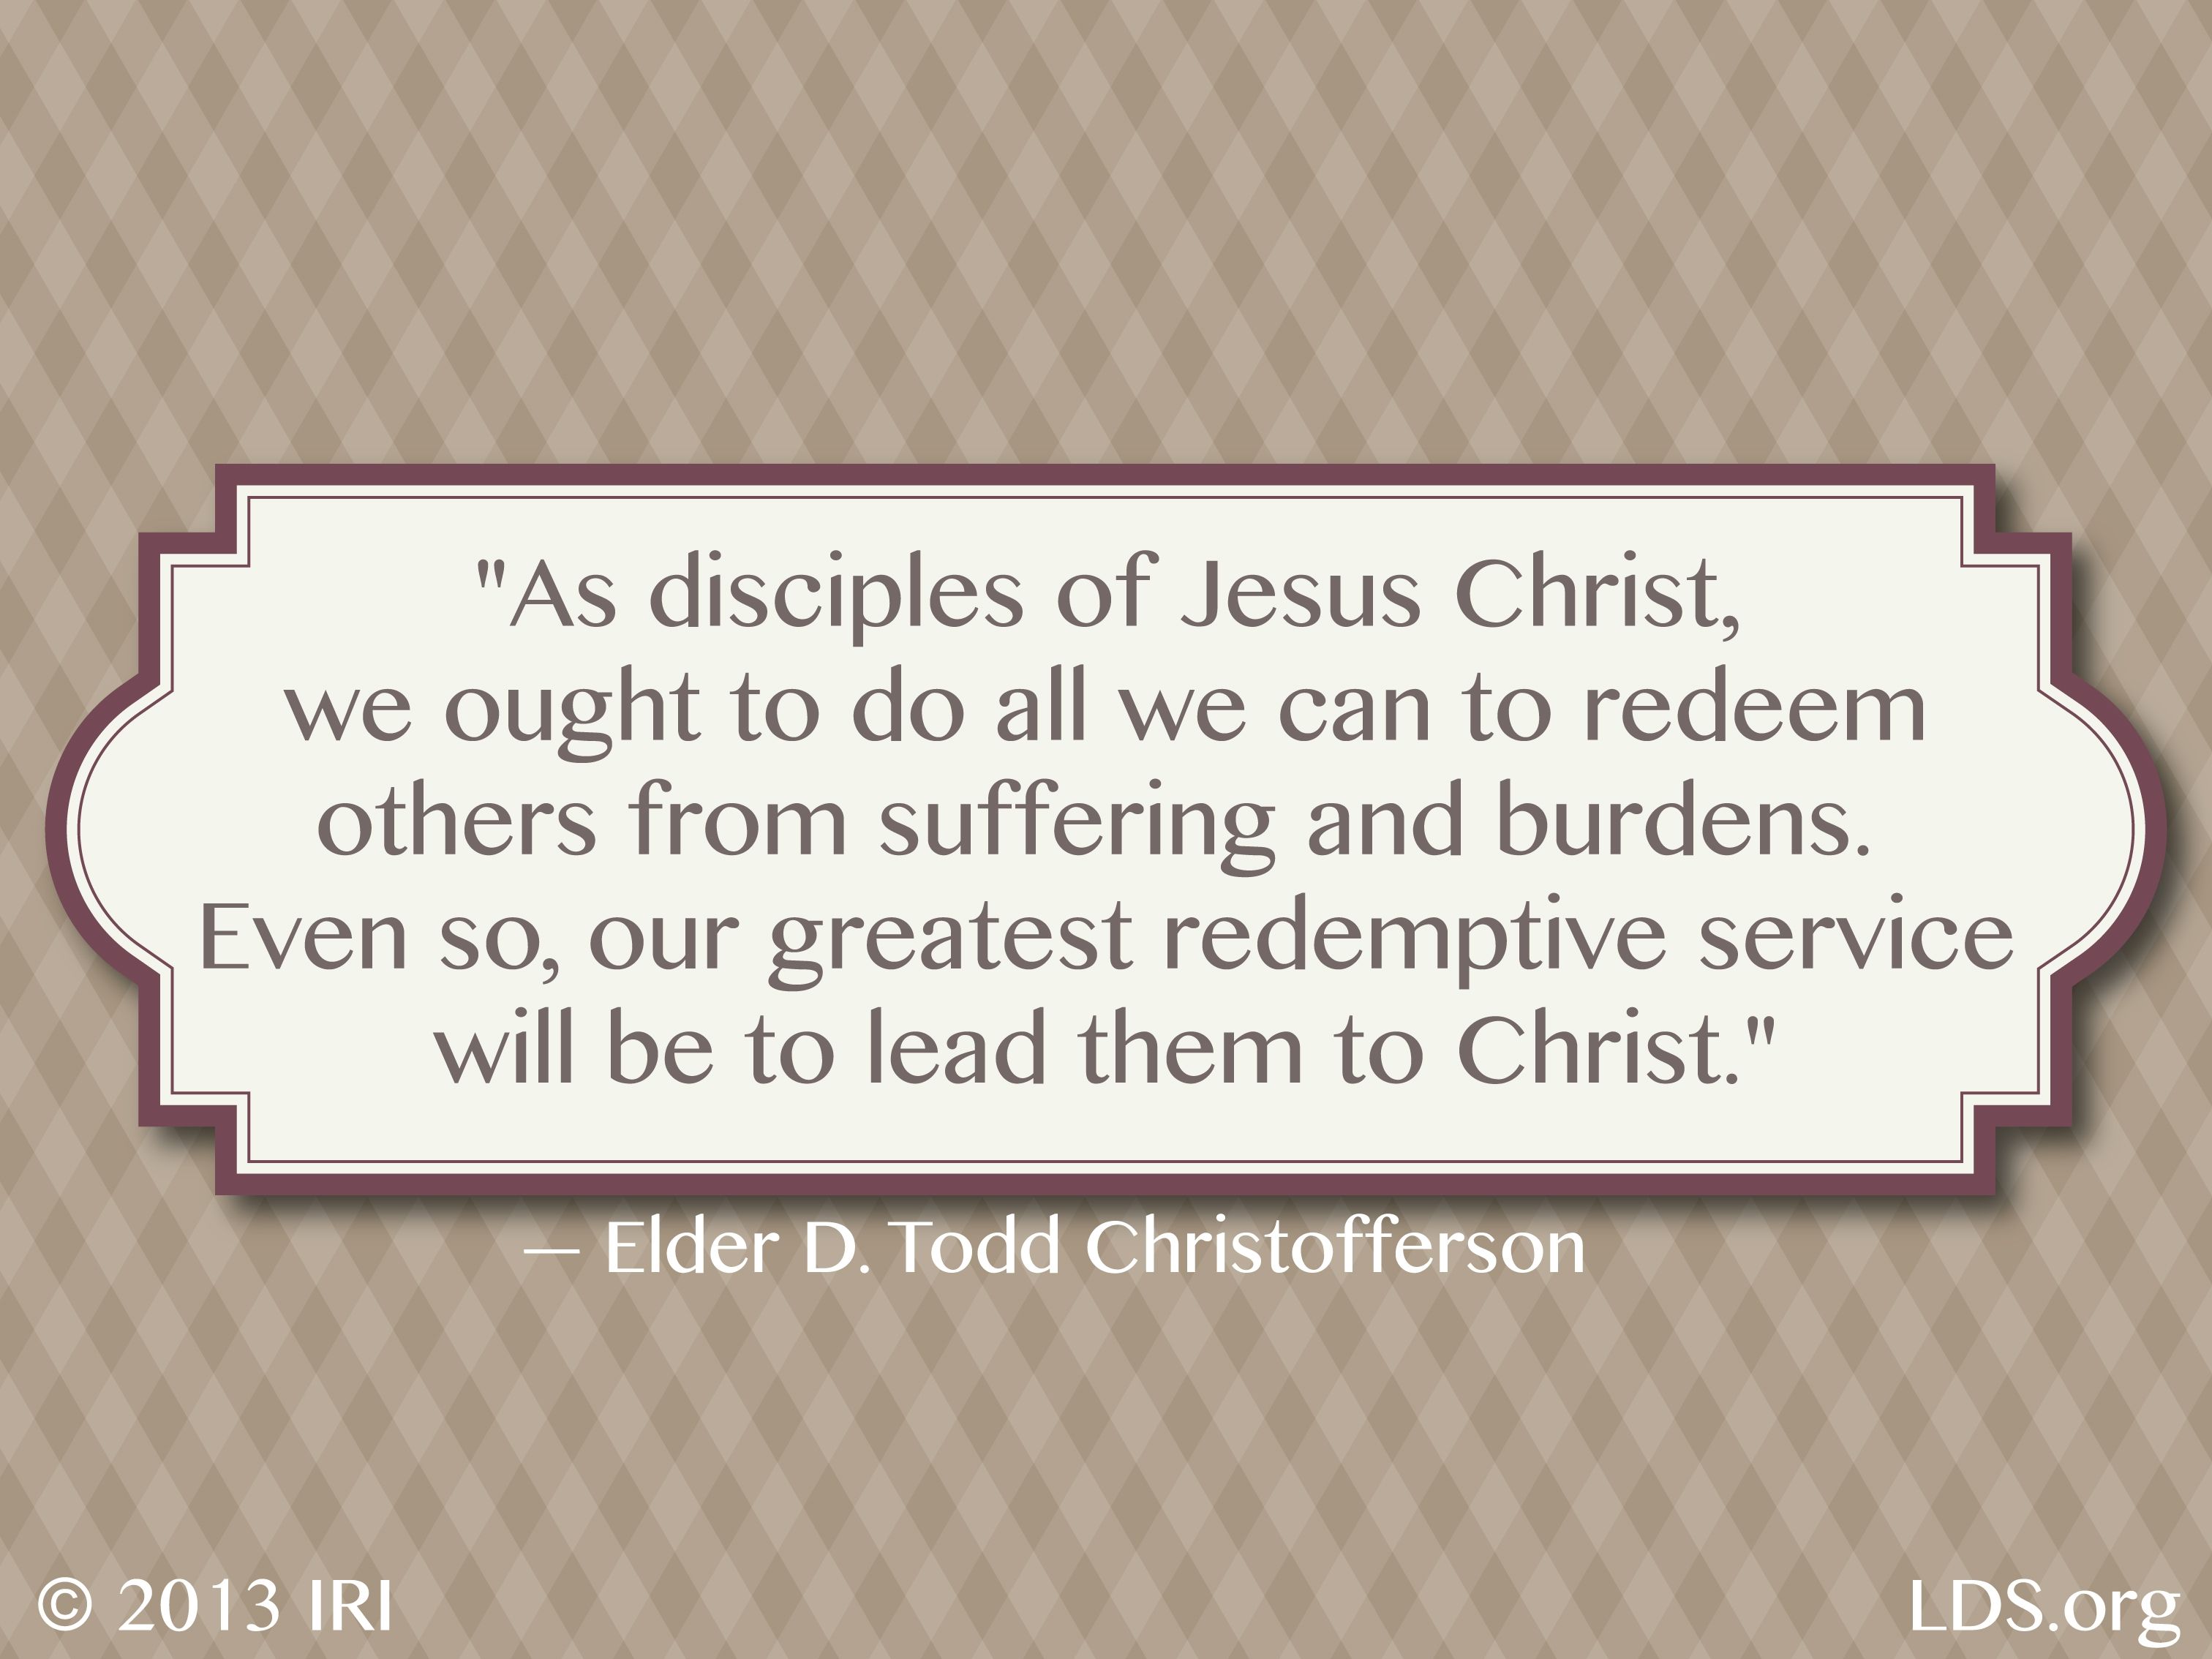 “As disciples of Jesus Christ, we ought to do all we can to redeem others from suffering and burdens. Even so, our greatest redemptive service will be to lead them to Christ.”—Elder D. Todd Christofferson, “Redemption”